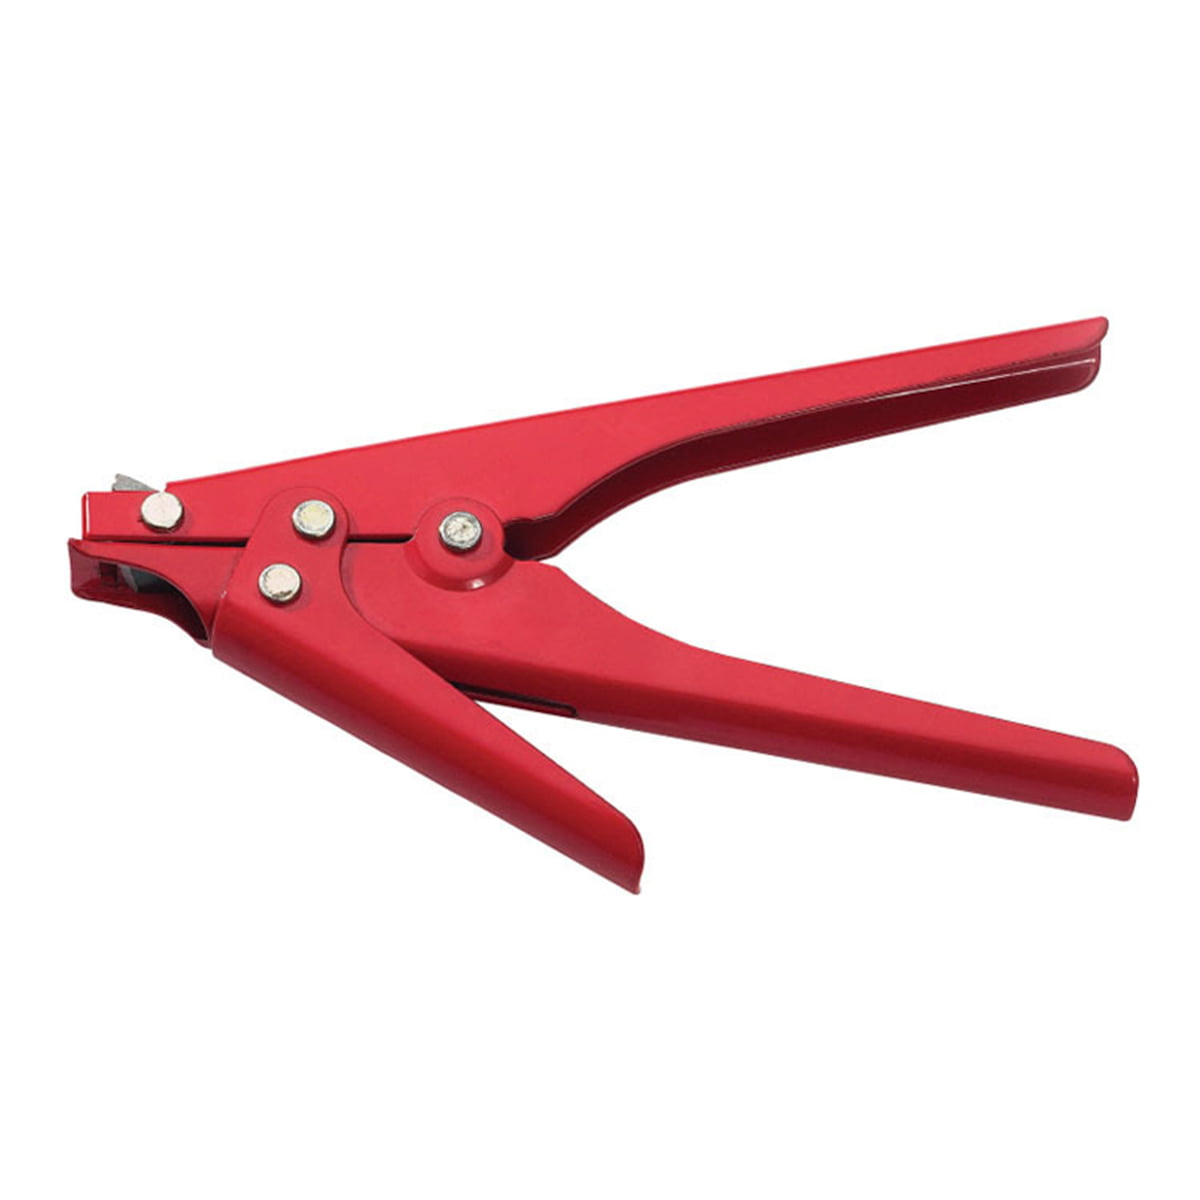 Details about   Nylon Cable Cable Zip Tie Tensioning Fasten Gun Pliers Cutter off Gun Hand Tool 